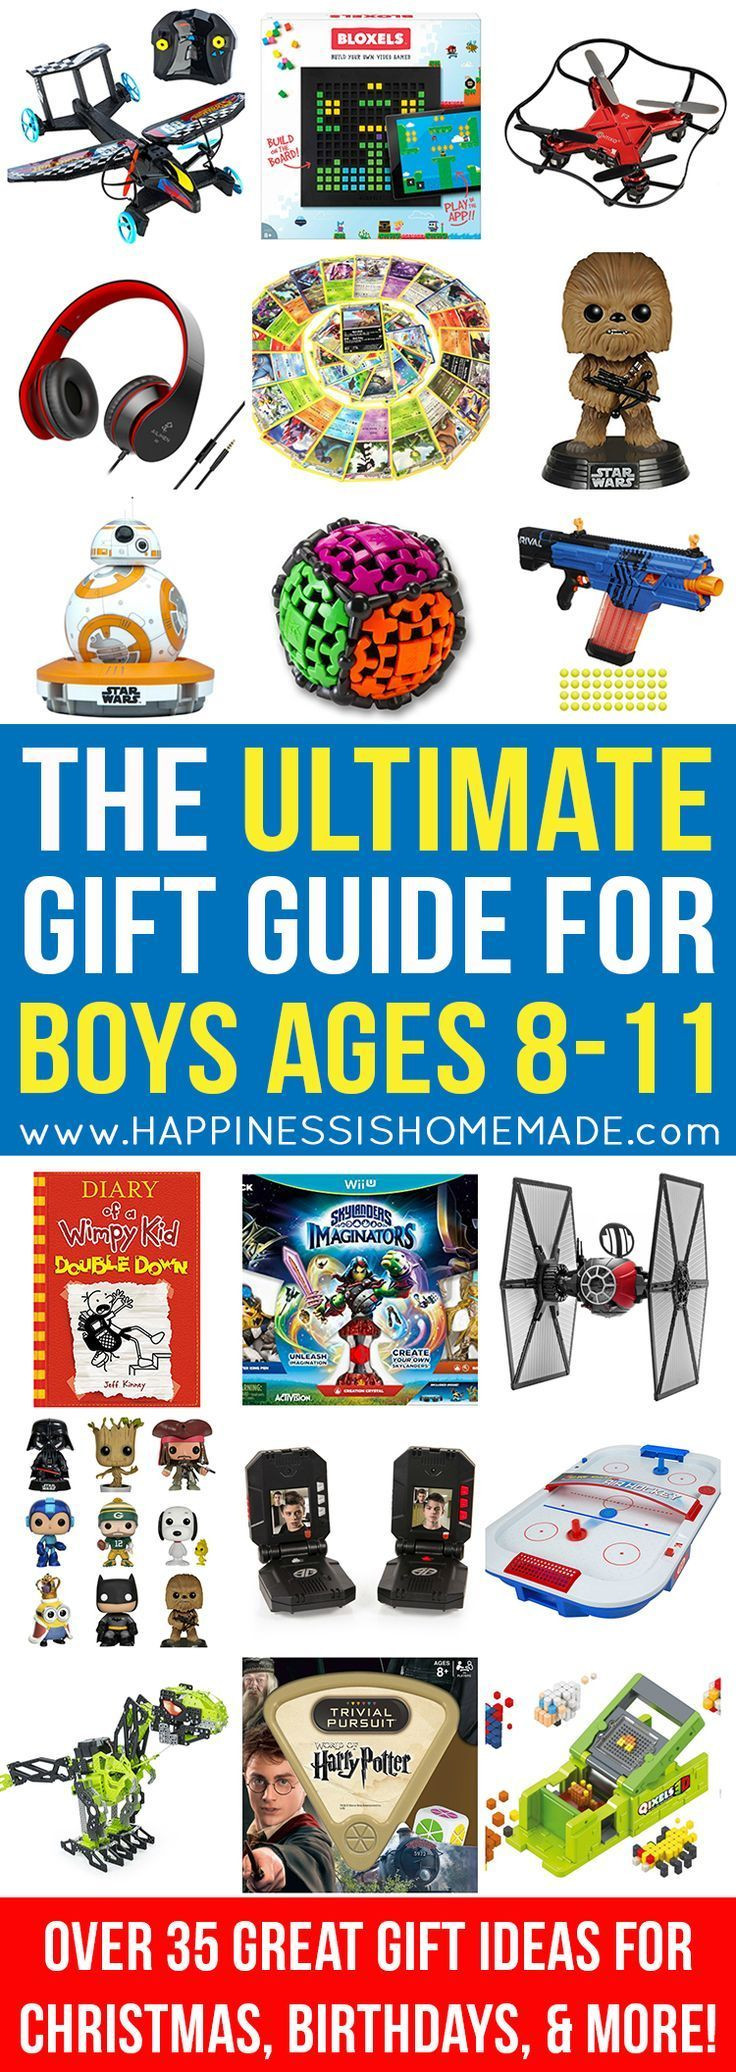 Gift Ideas For Boys Age 5
 The Best Gift Ideas for Boys Ages 8 11 Looking for t